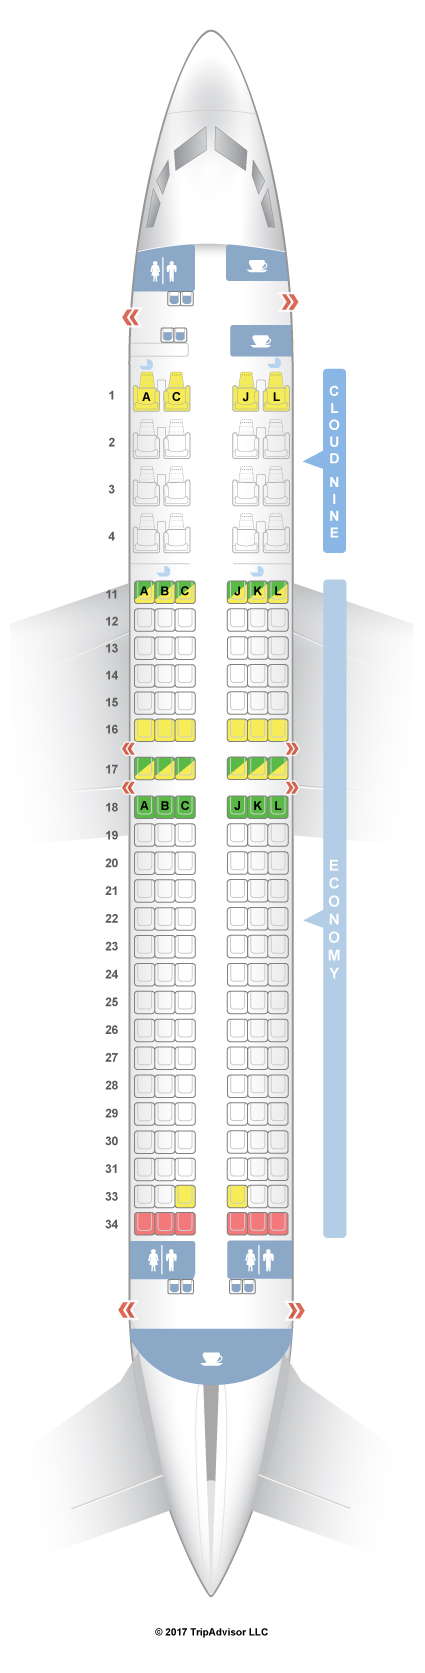 Boeing 737 800 Jet Seating Chart American Airlines